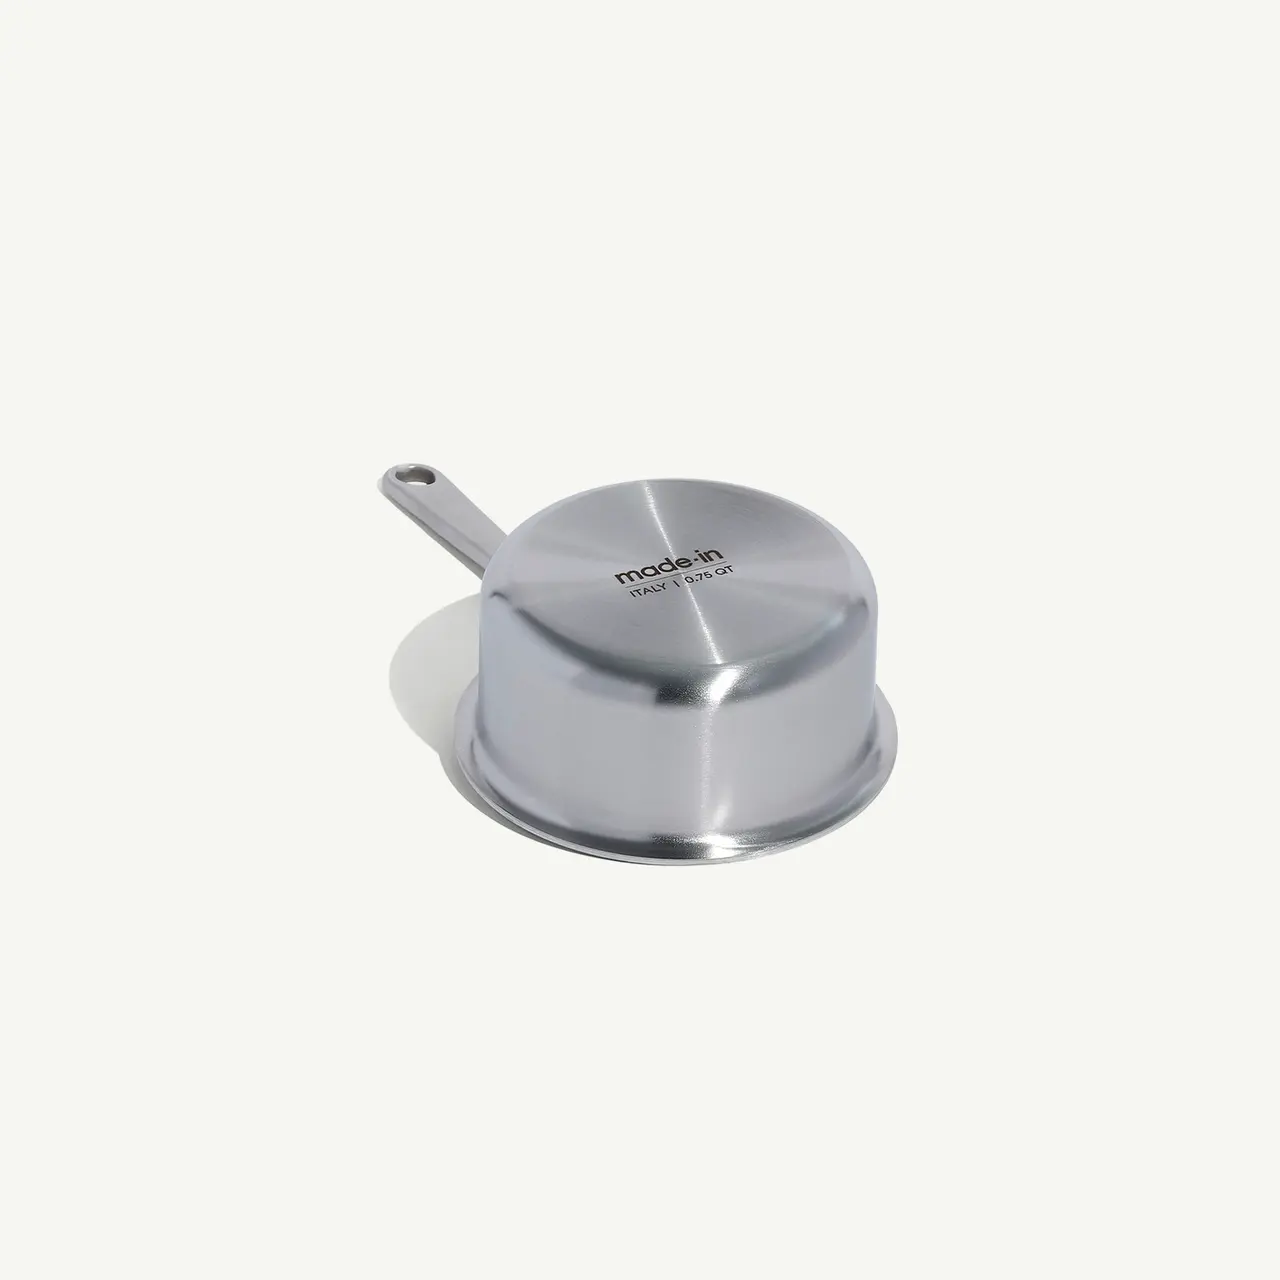 A stainless steel saucepan lid with a flat top and a looped handle sits on a matching larger plate, all against a white background.